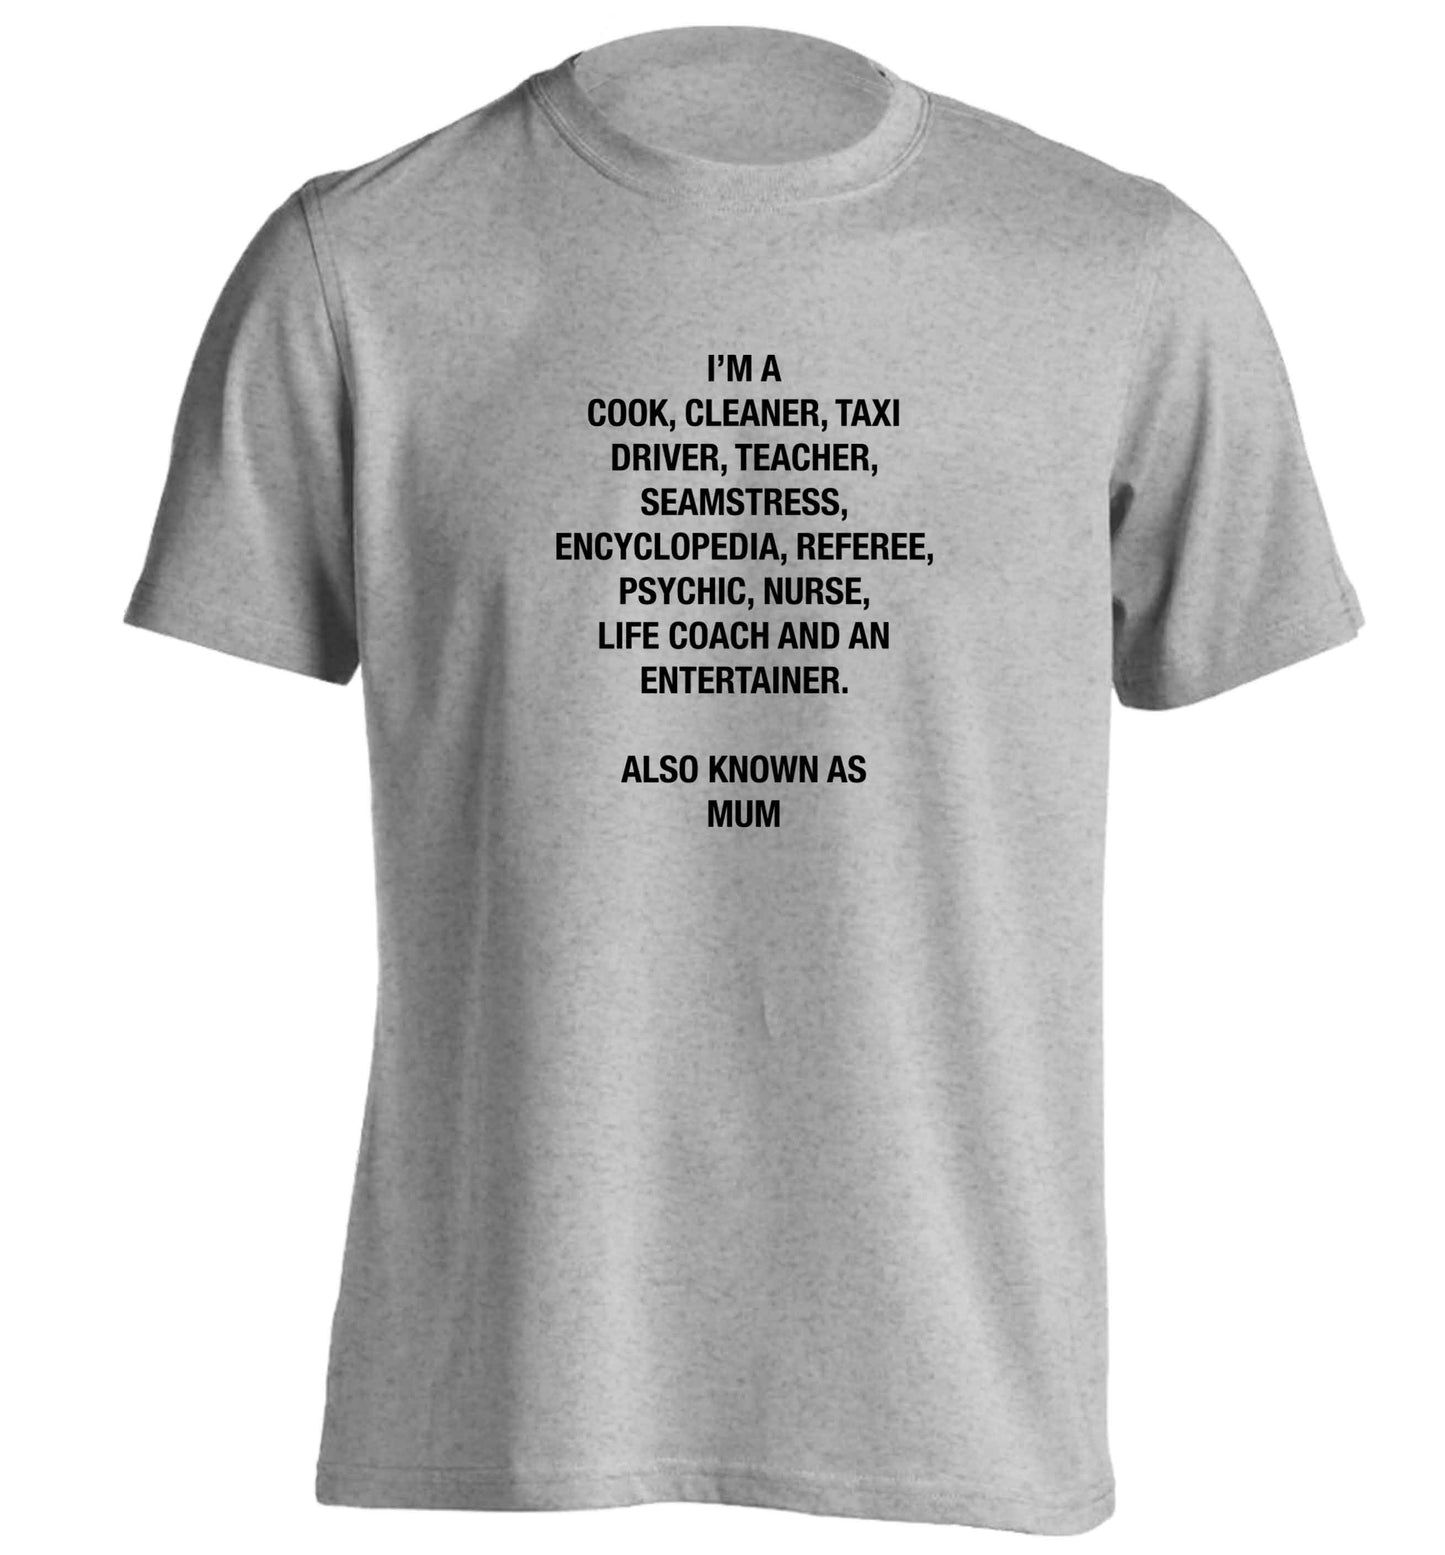 Funny gifts for your mum on mother's dayor her birthday! Mum, cook, cleaner, taxi driver, teacher, seamstress, encyclopedia, referee, psychic, nurse, life coach and entertainer adults unisex grey Tshirt 2XL